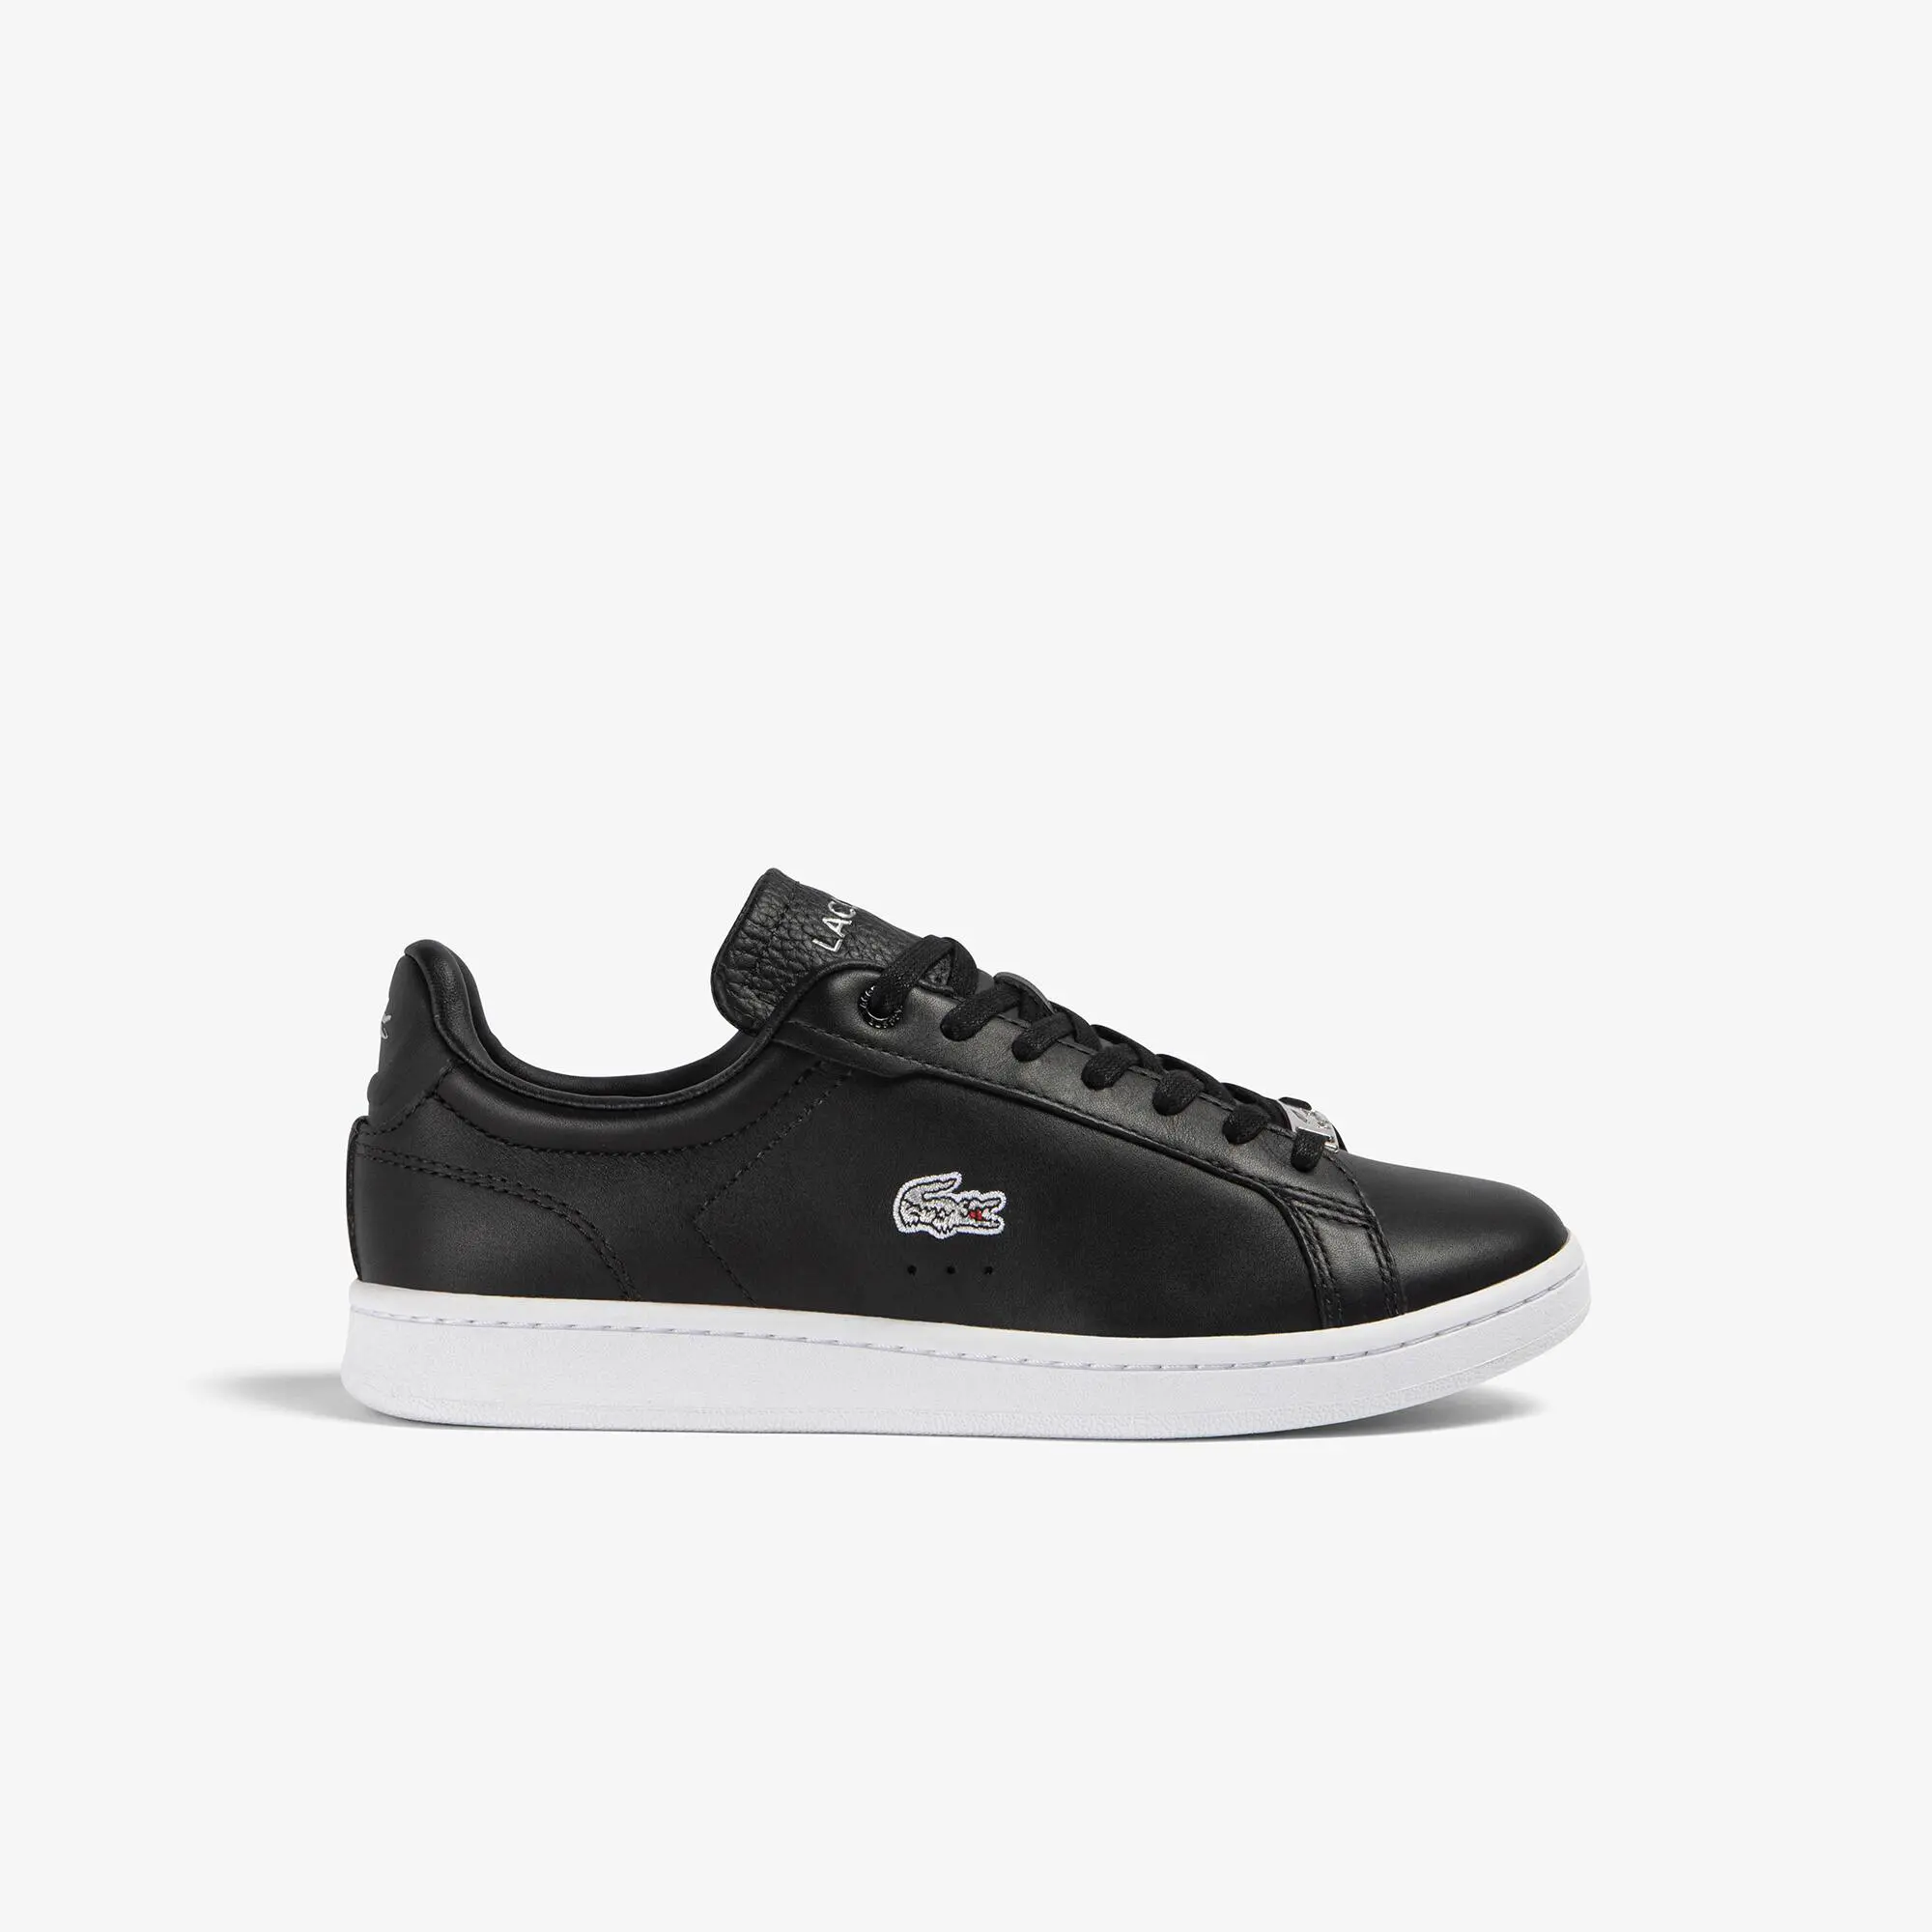 Lacoste Women's Carnaby Pro Leather Sneakers. 1